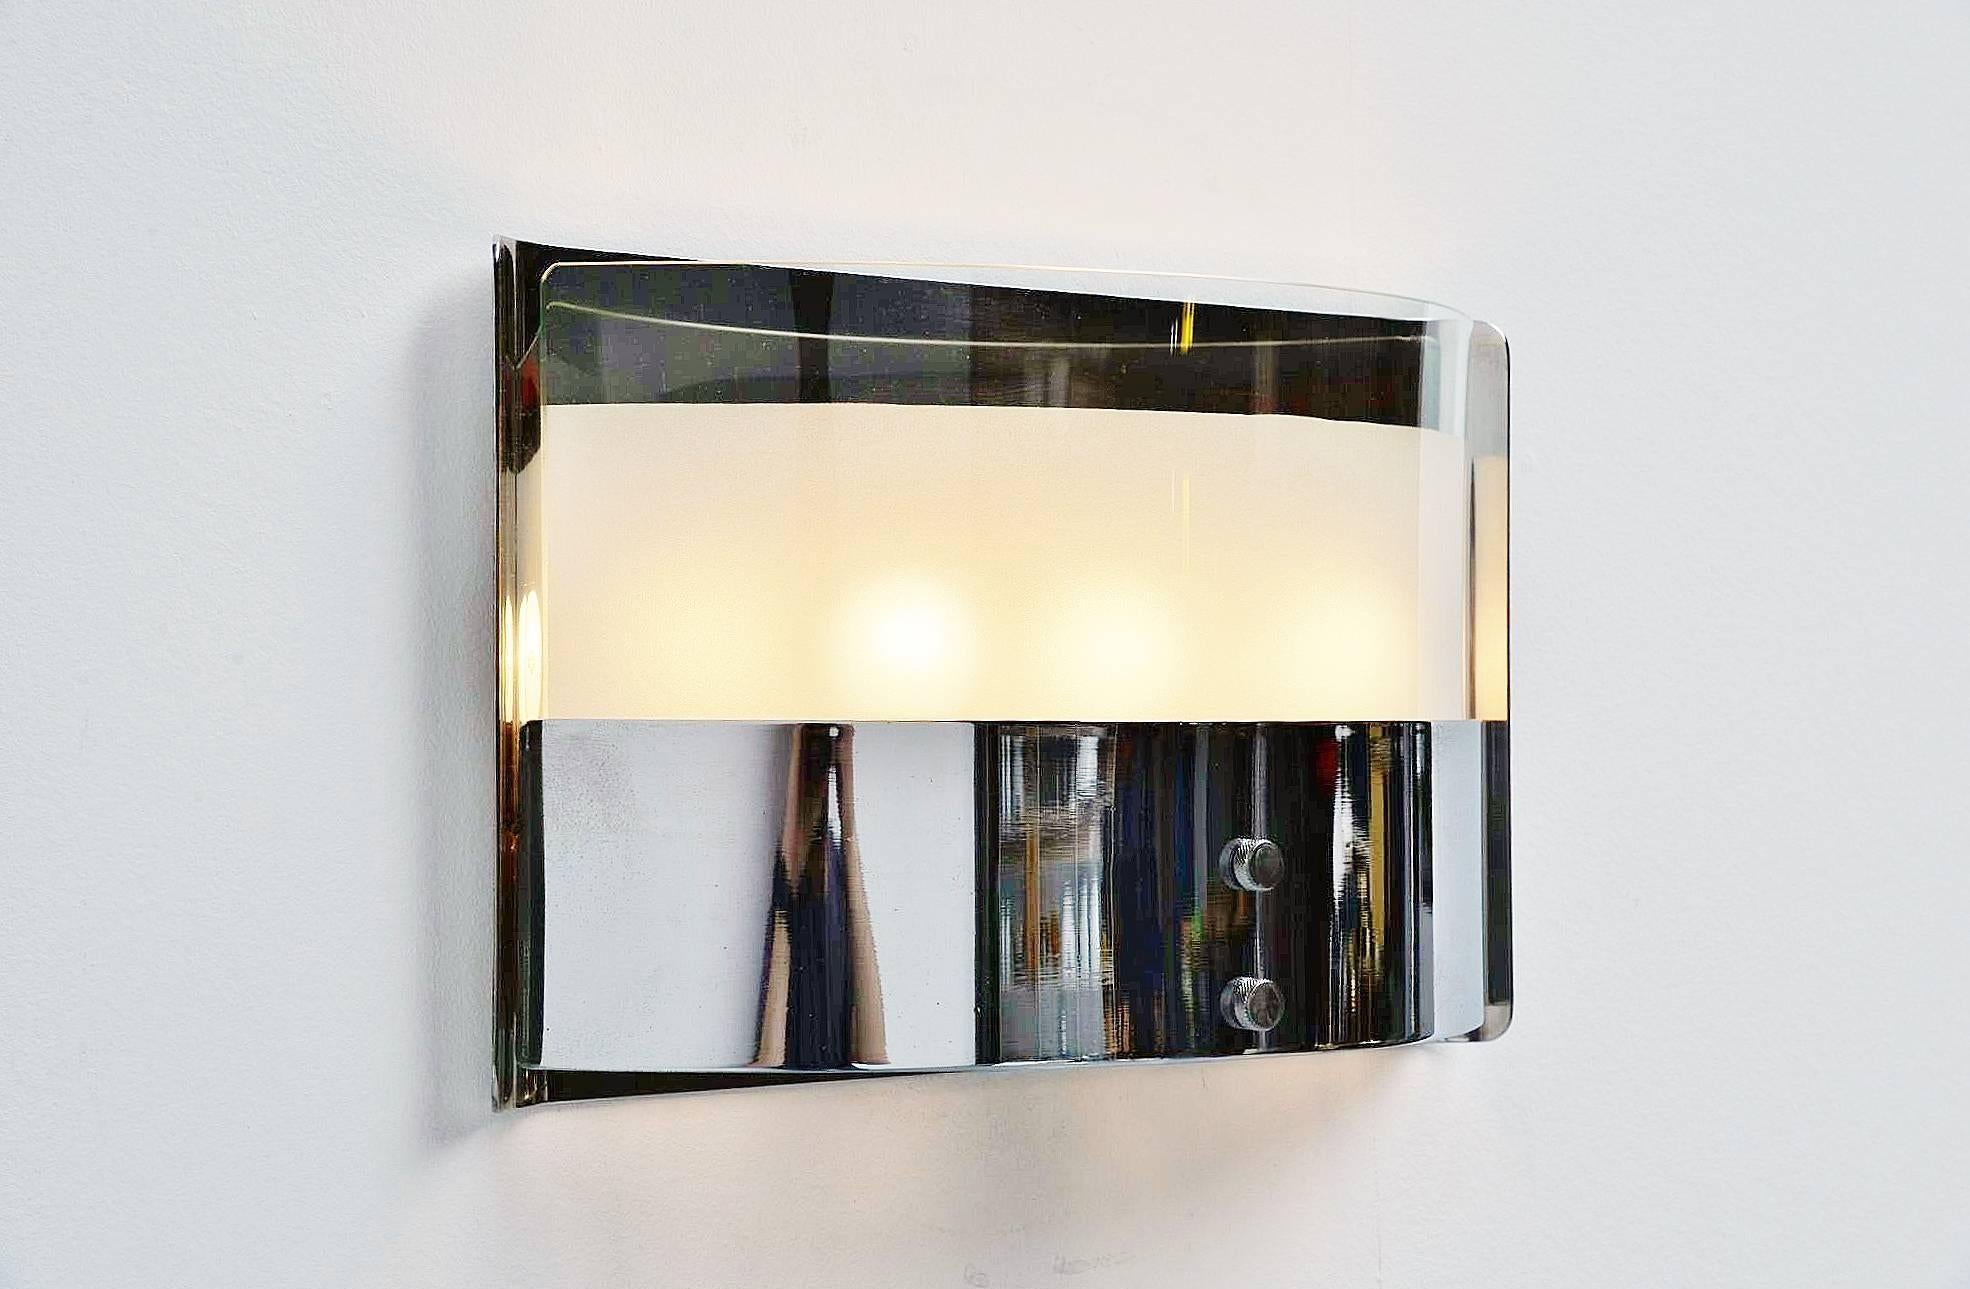 Highly decorative wall lamp designed by Luigi Caccia Dominioni, manufactured by Azucena, Italy, 1960. This wall lamp has a heavy chrome-plated frame and glass diffuser shade, partly transparent, partly frosted. This uses three light bulbs and gives